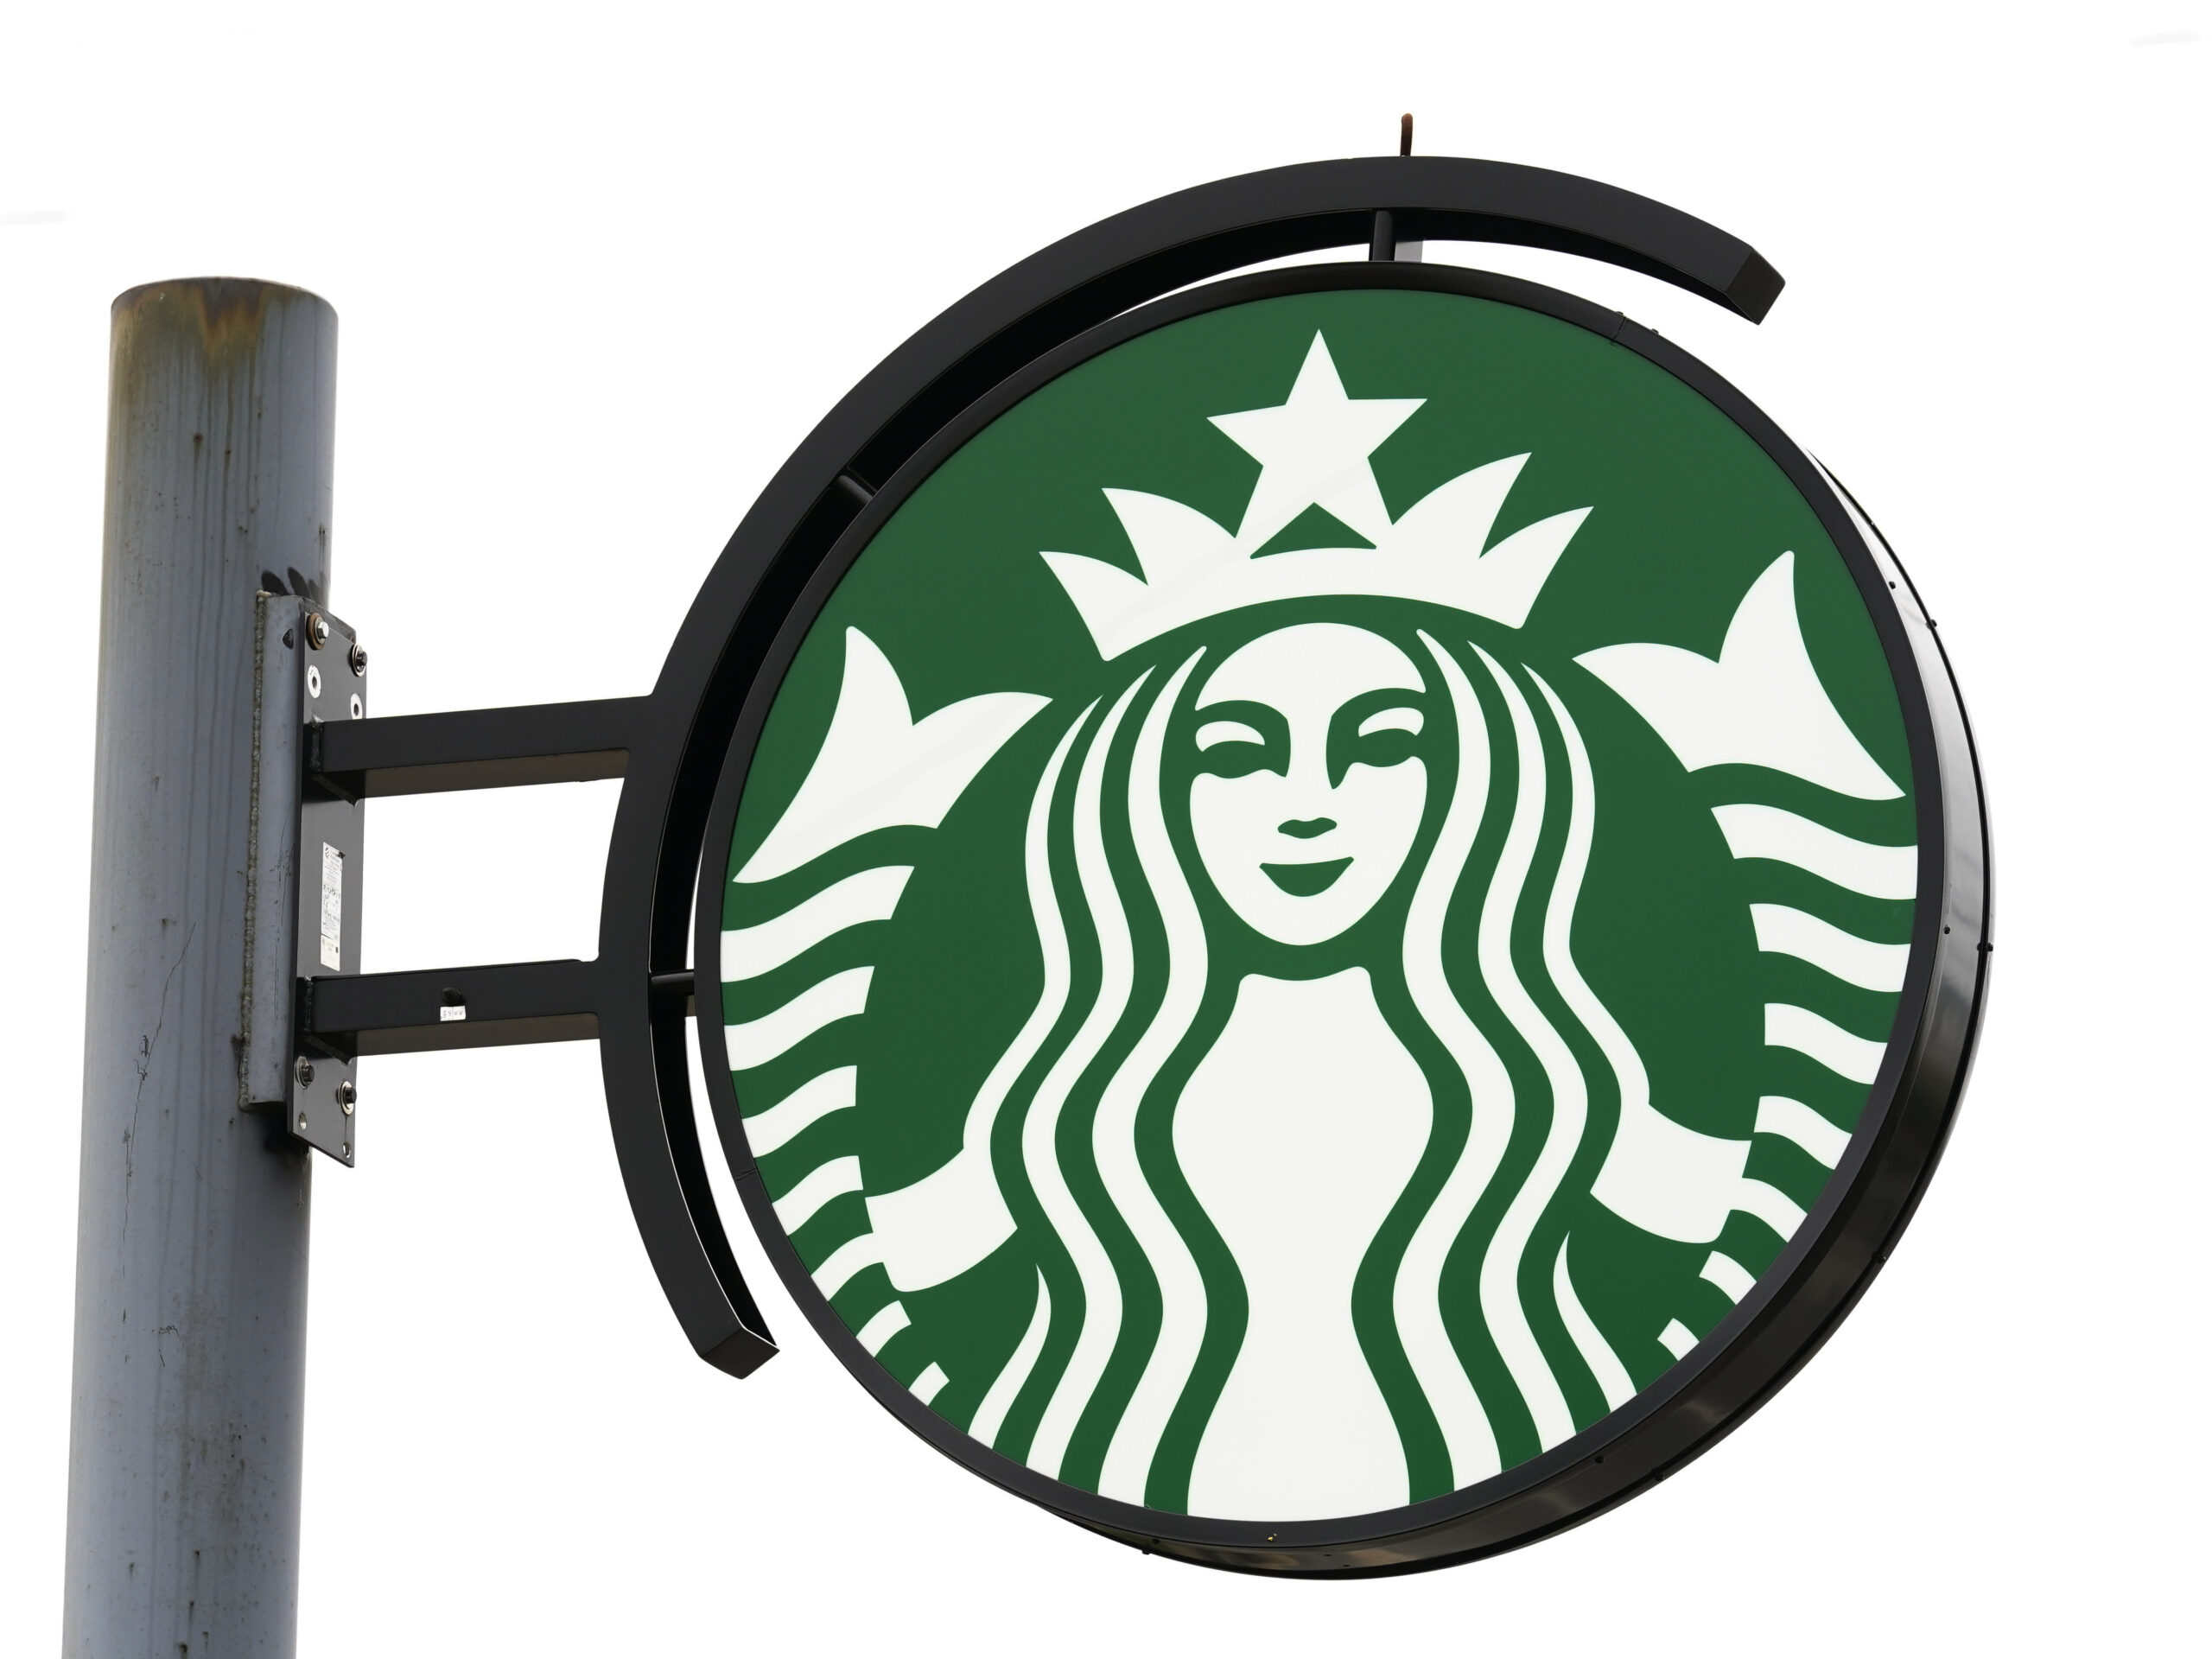 More than 440,000 Starbucks mugs recalled after reports of a dozen injuries